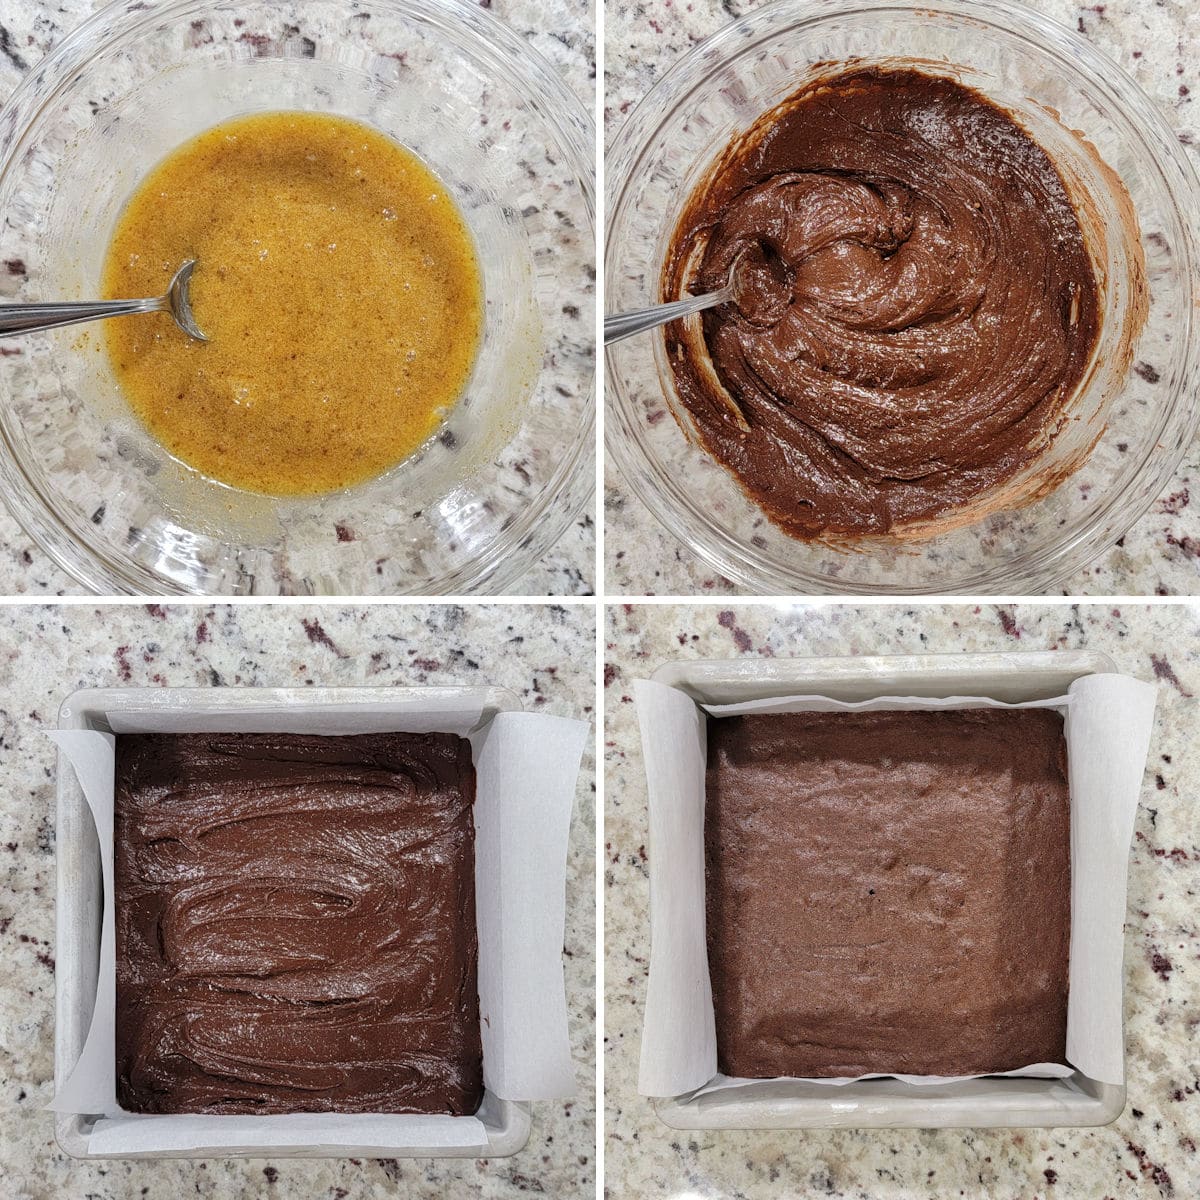 Mixing brownie batter and baking in an 8x8 pan.